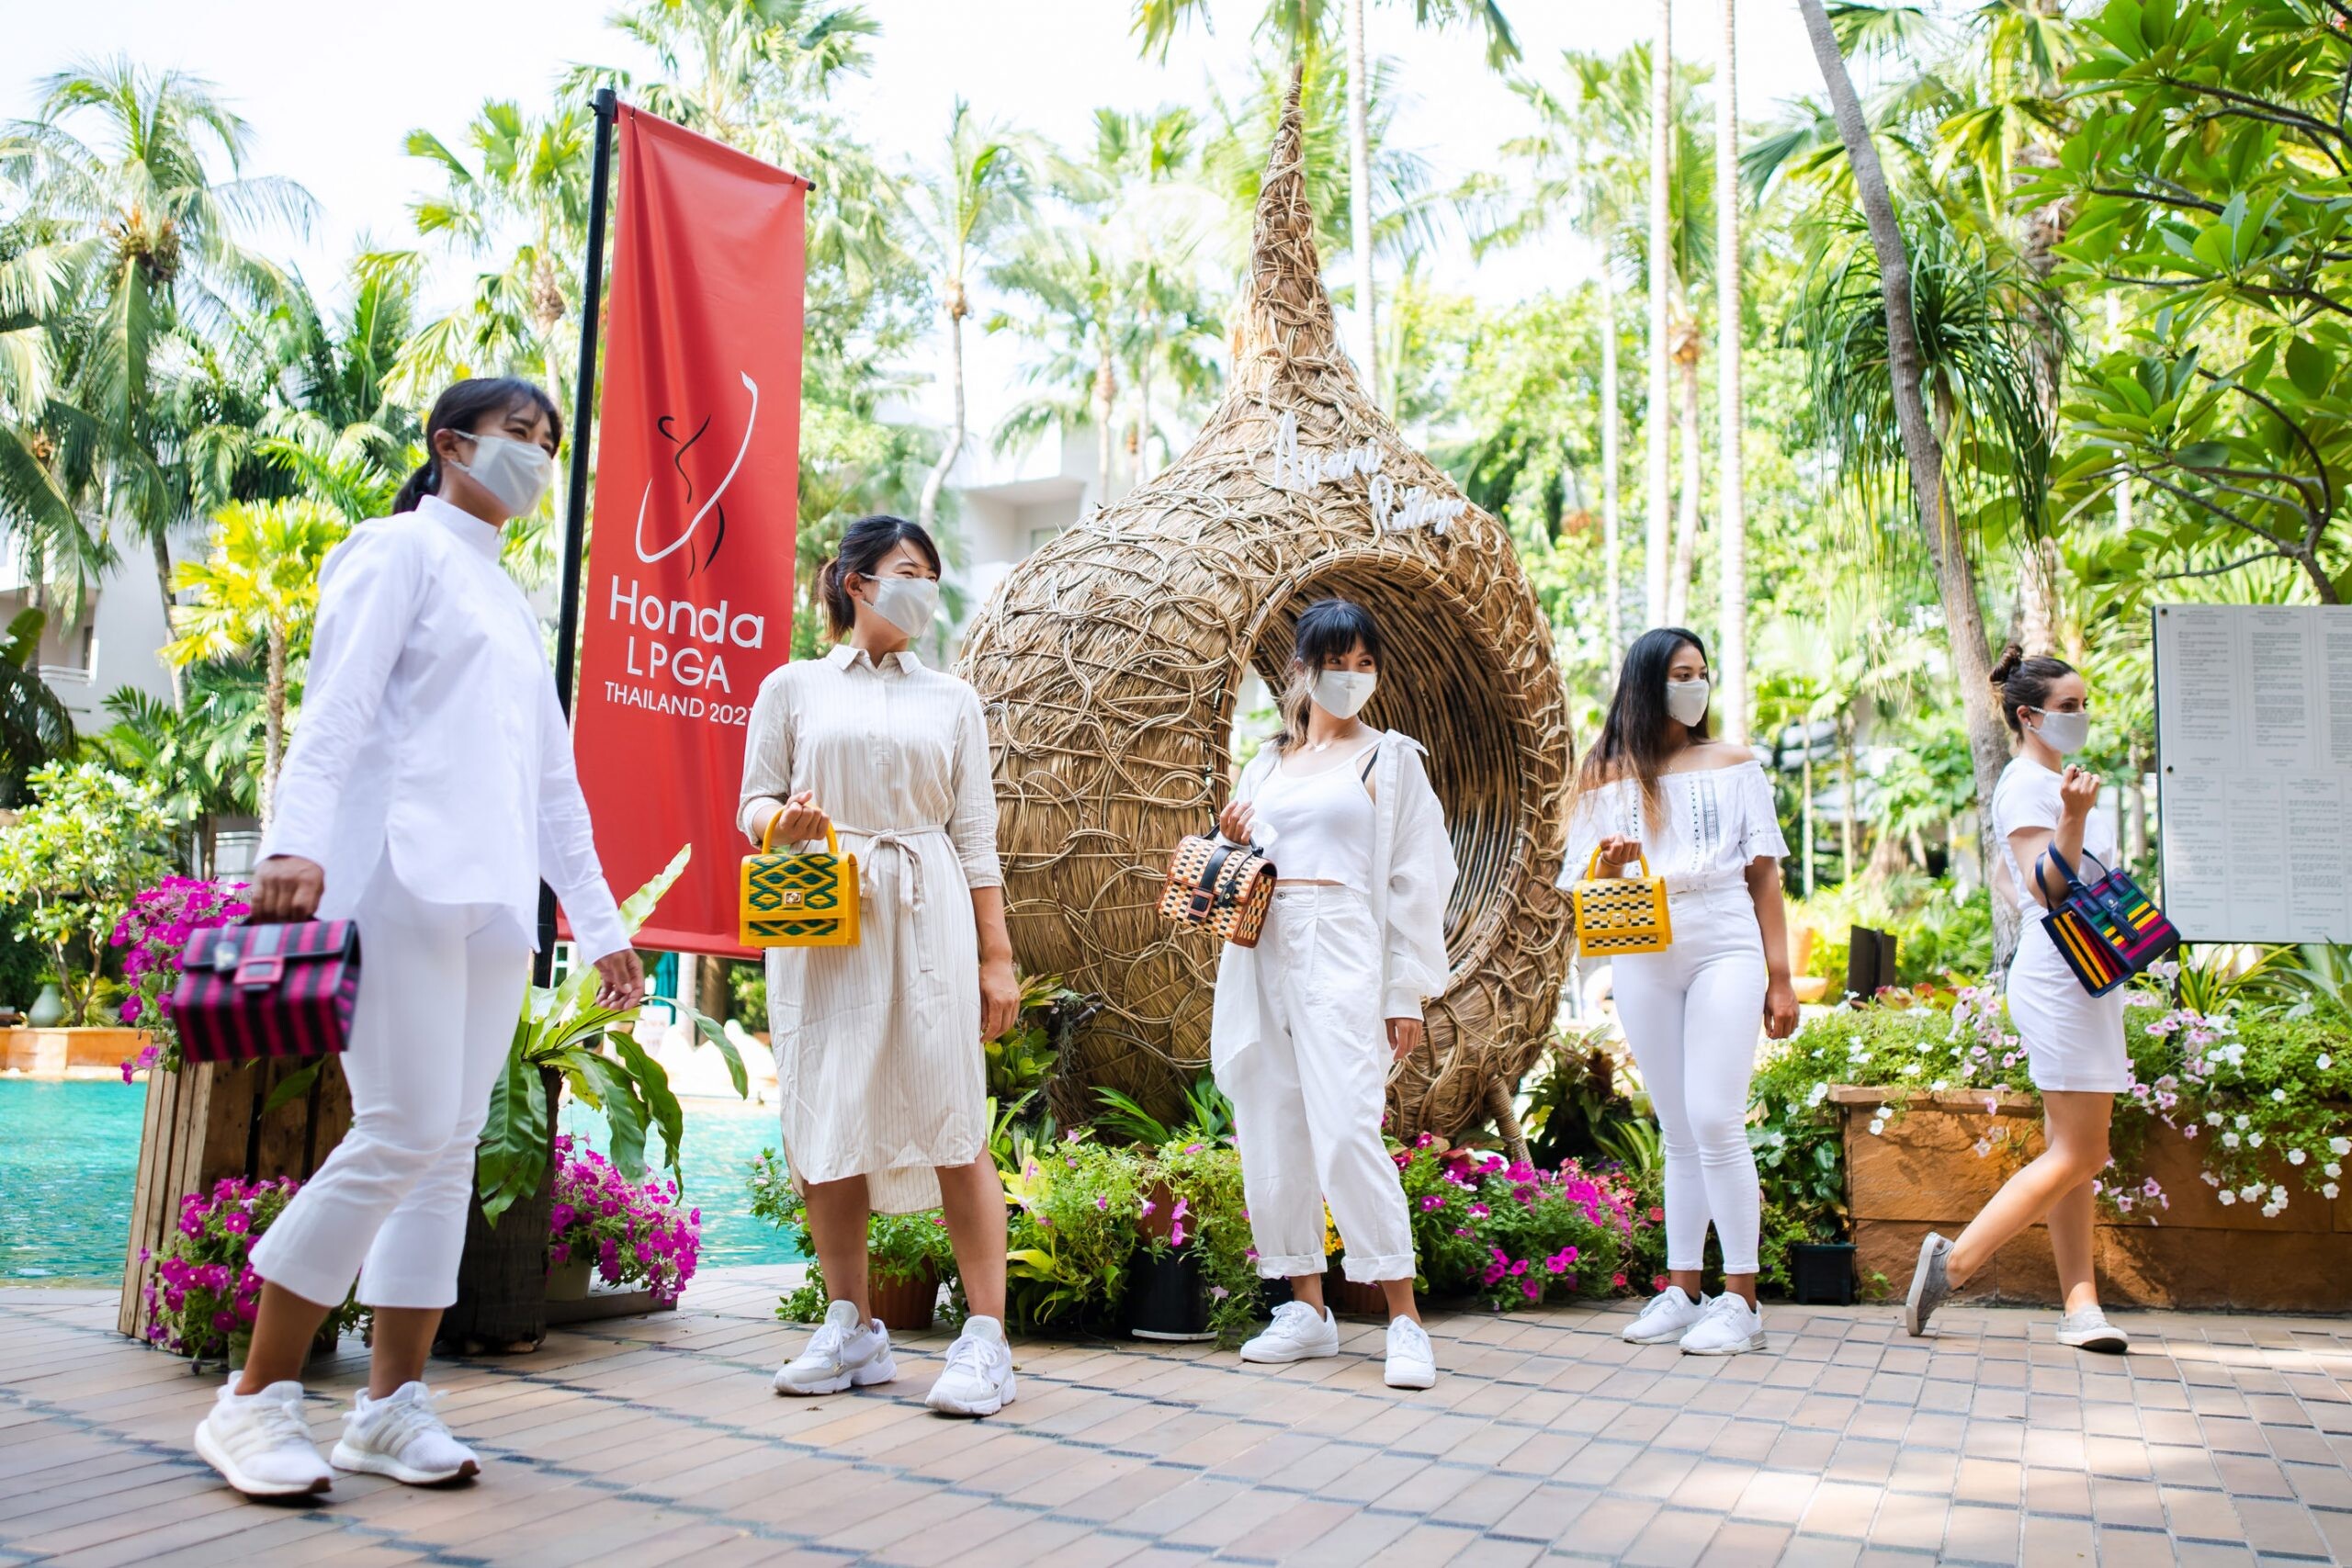 Five Representative Female Golfers from Honda LPGA Thailand2021 discover exquisite Thai craftsmanship before the tournament starts from 6-9 May 2021